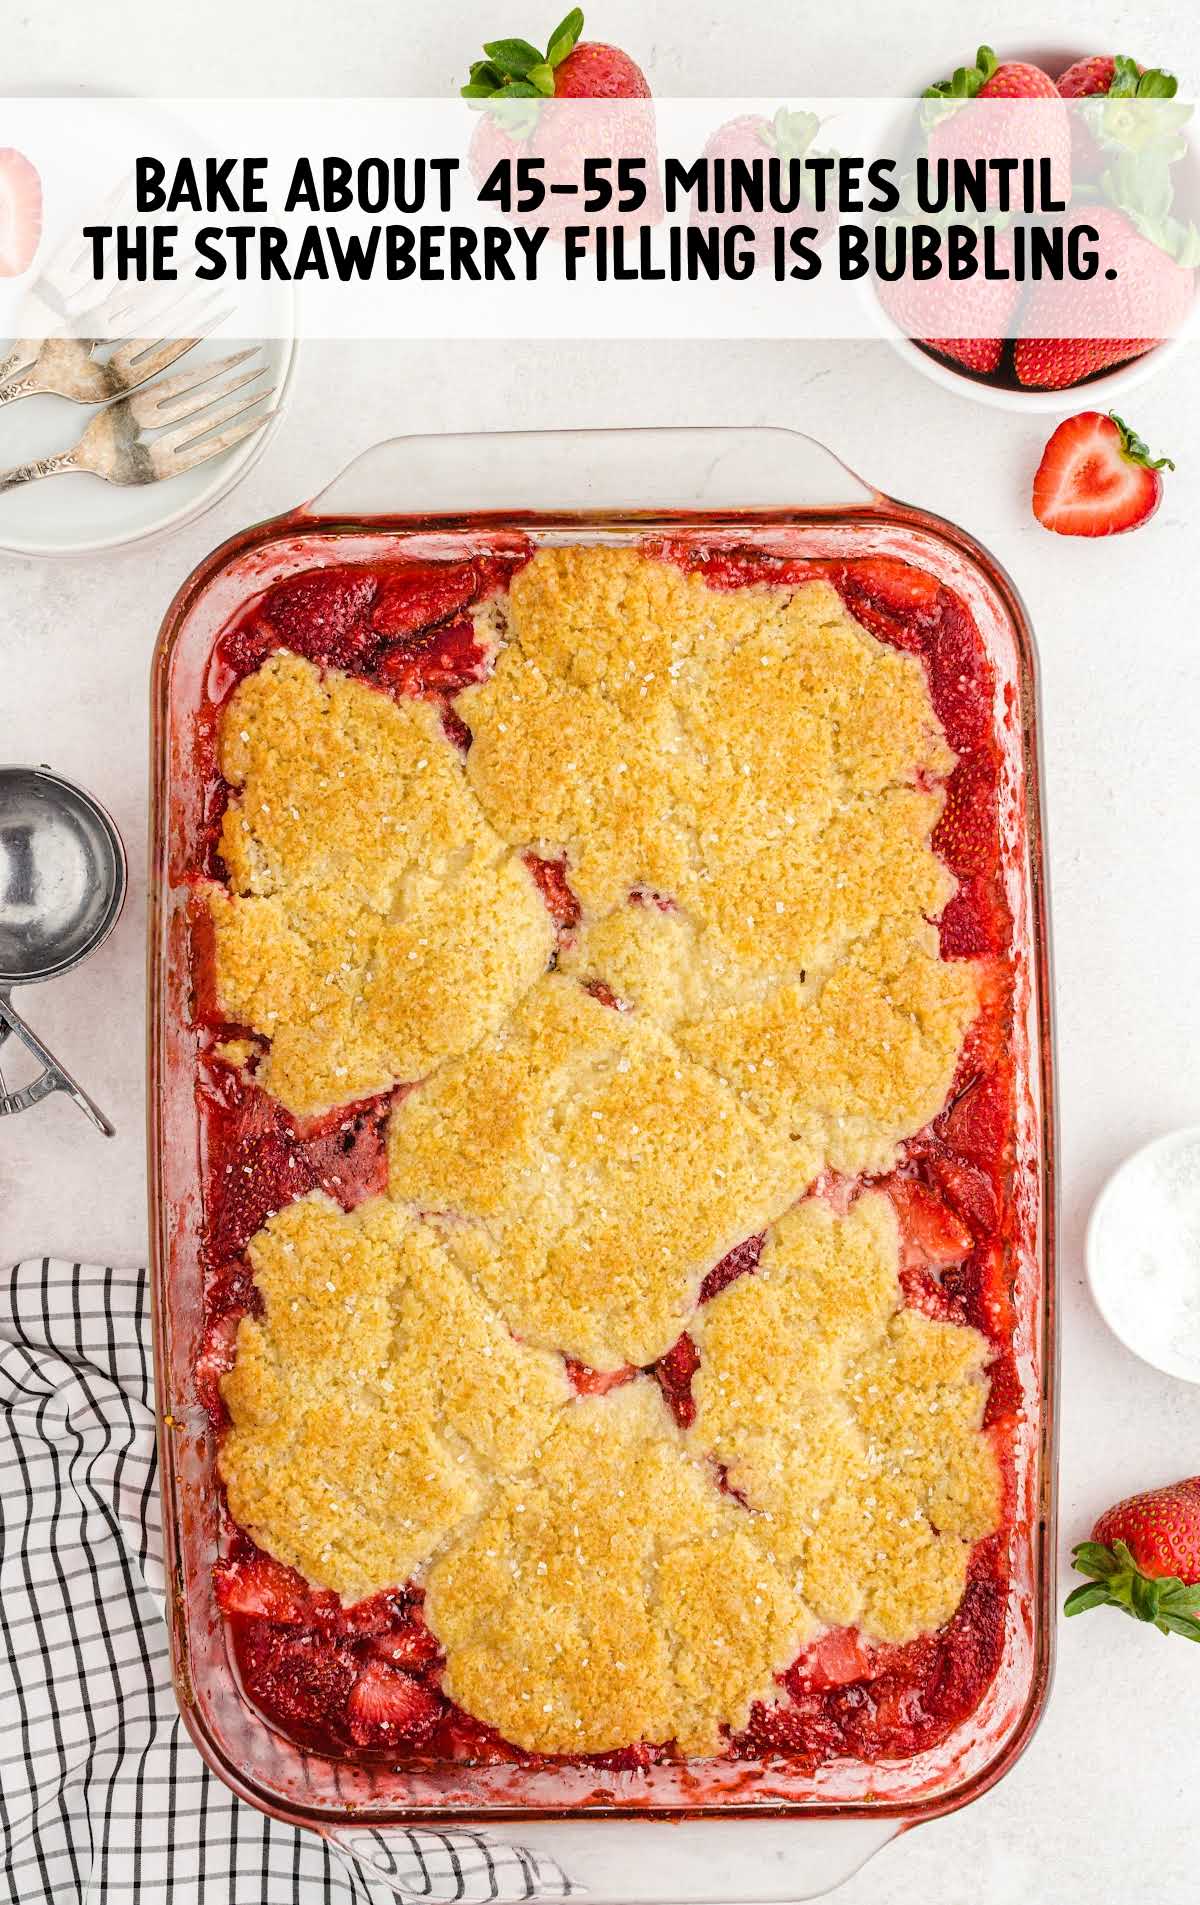 Strawberry Cobbler baked in a baking dish